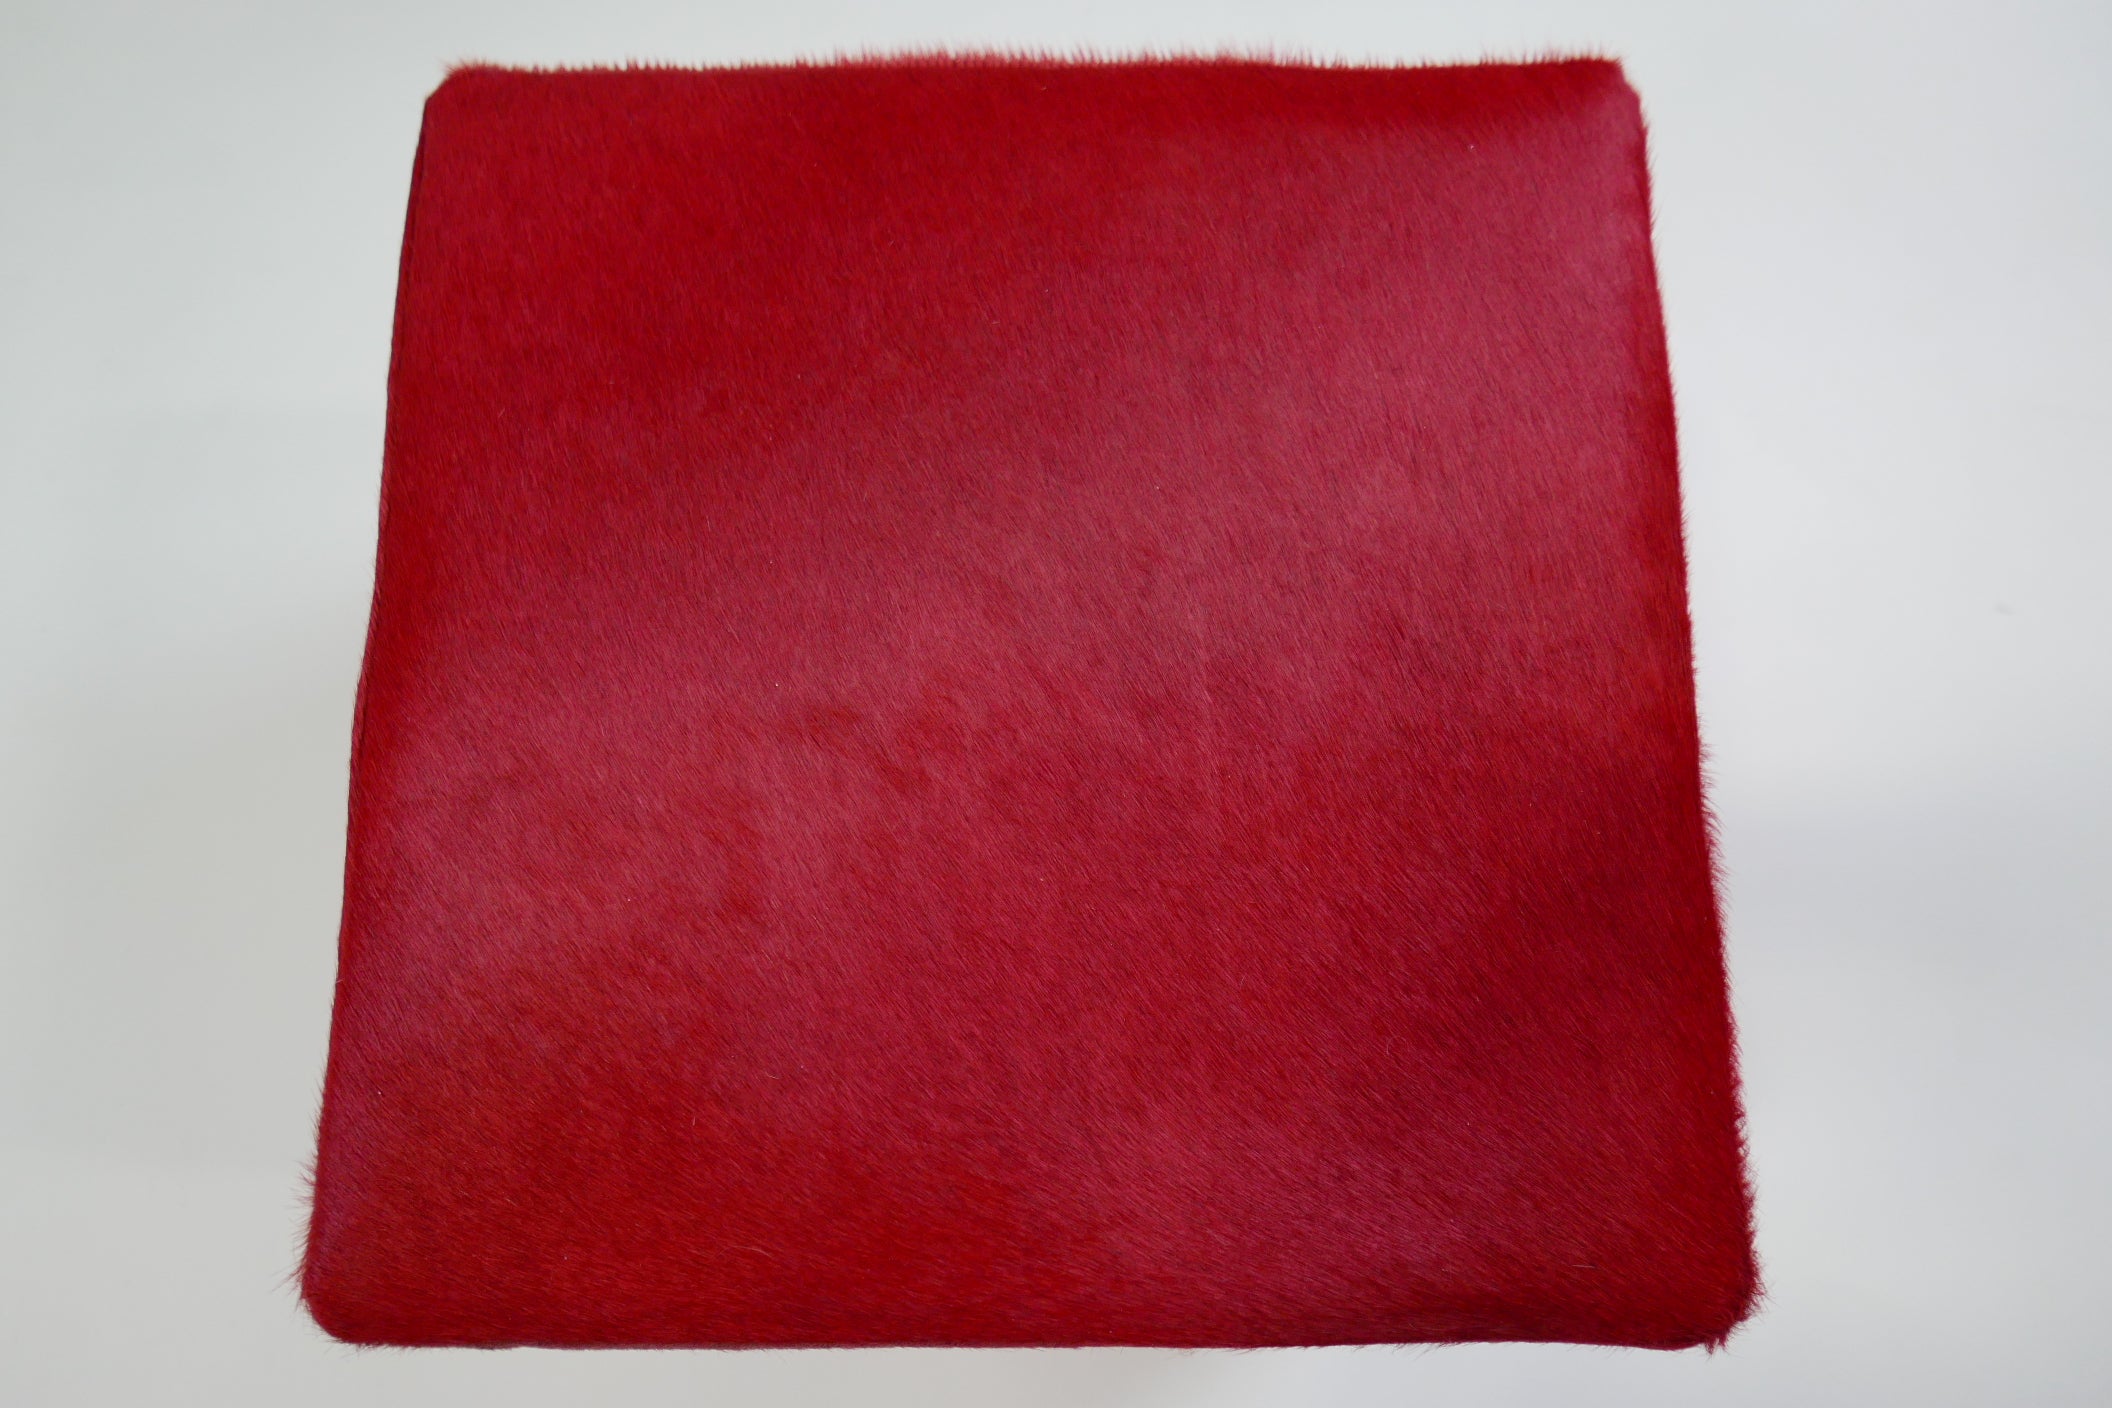 Cowhide Ottoman Cube 16X16X16" Burgundy Cowhide Dyed Red Leather Furniture